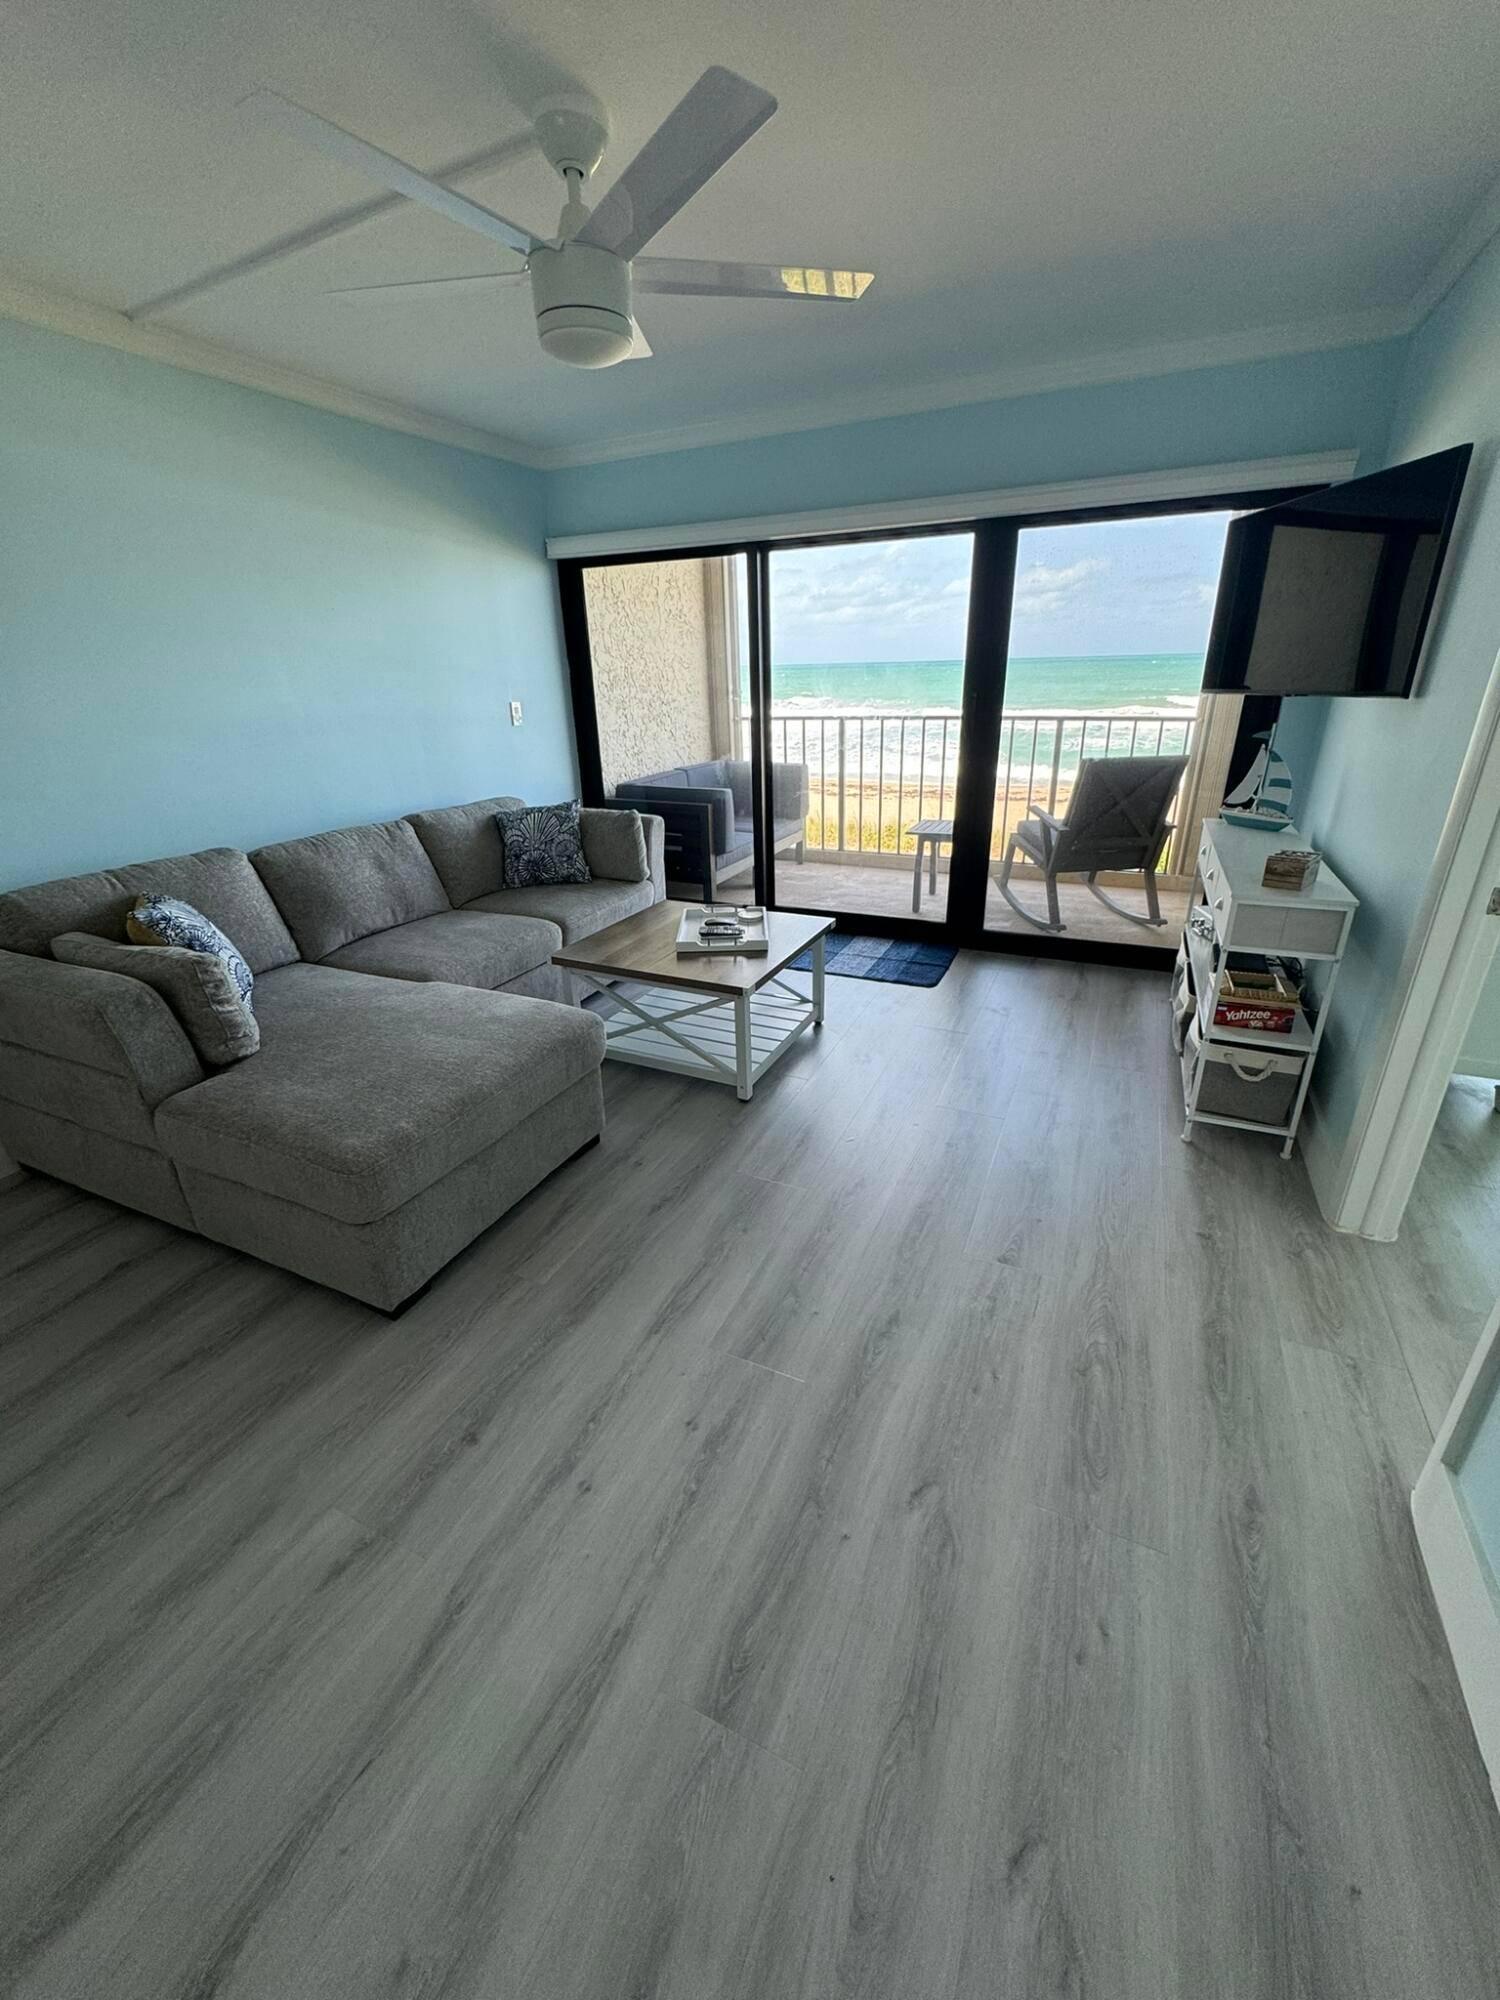 Magnificent, freshly renovated oceanfront condo.